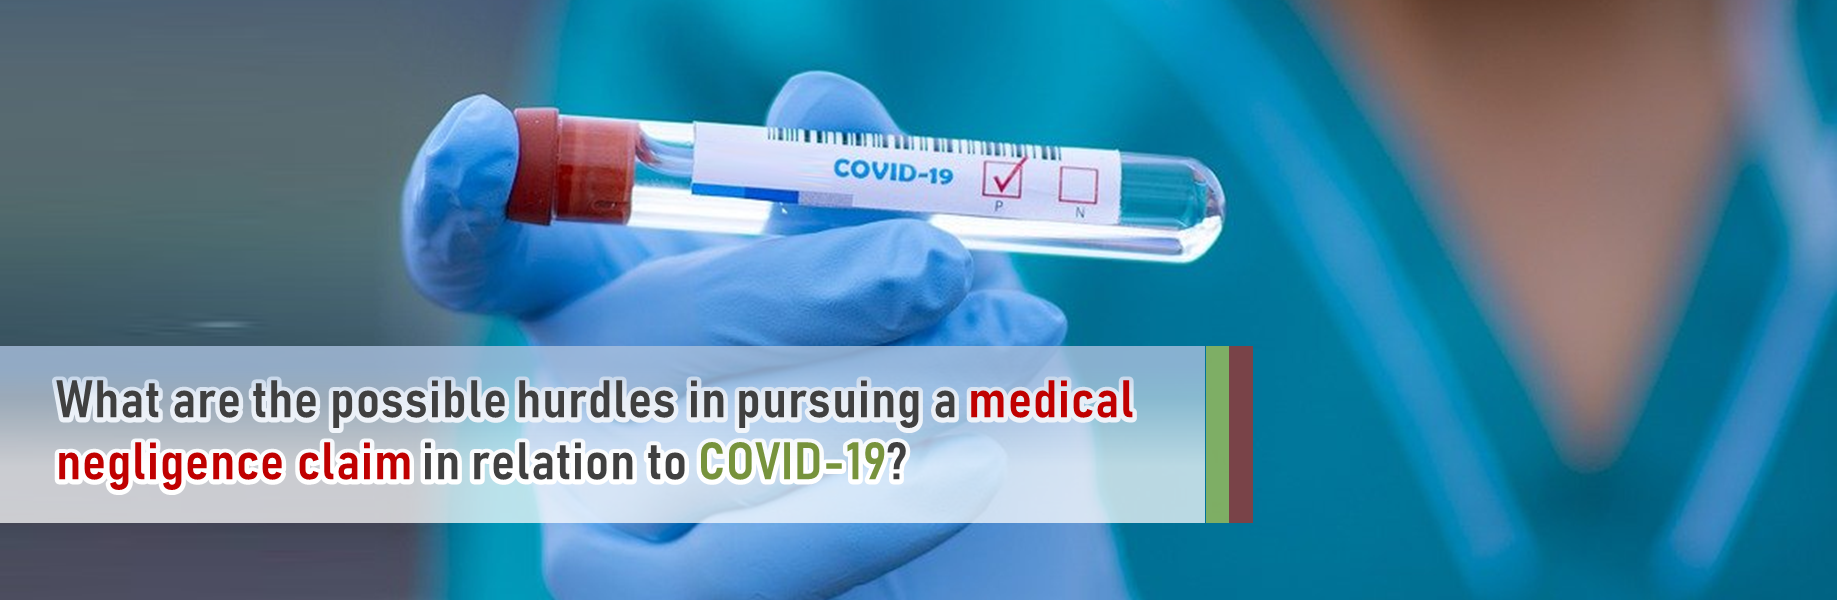 What are the possible hurdles in pursuing a medical negligence claim in relation to COVID-19?